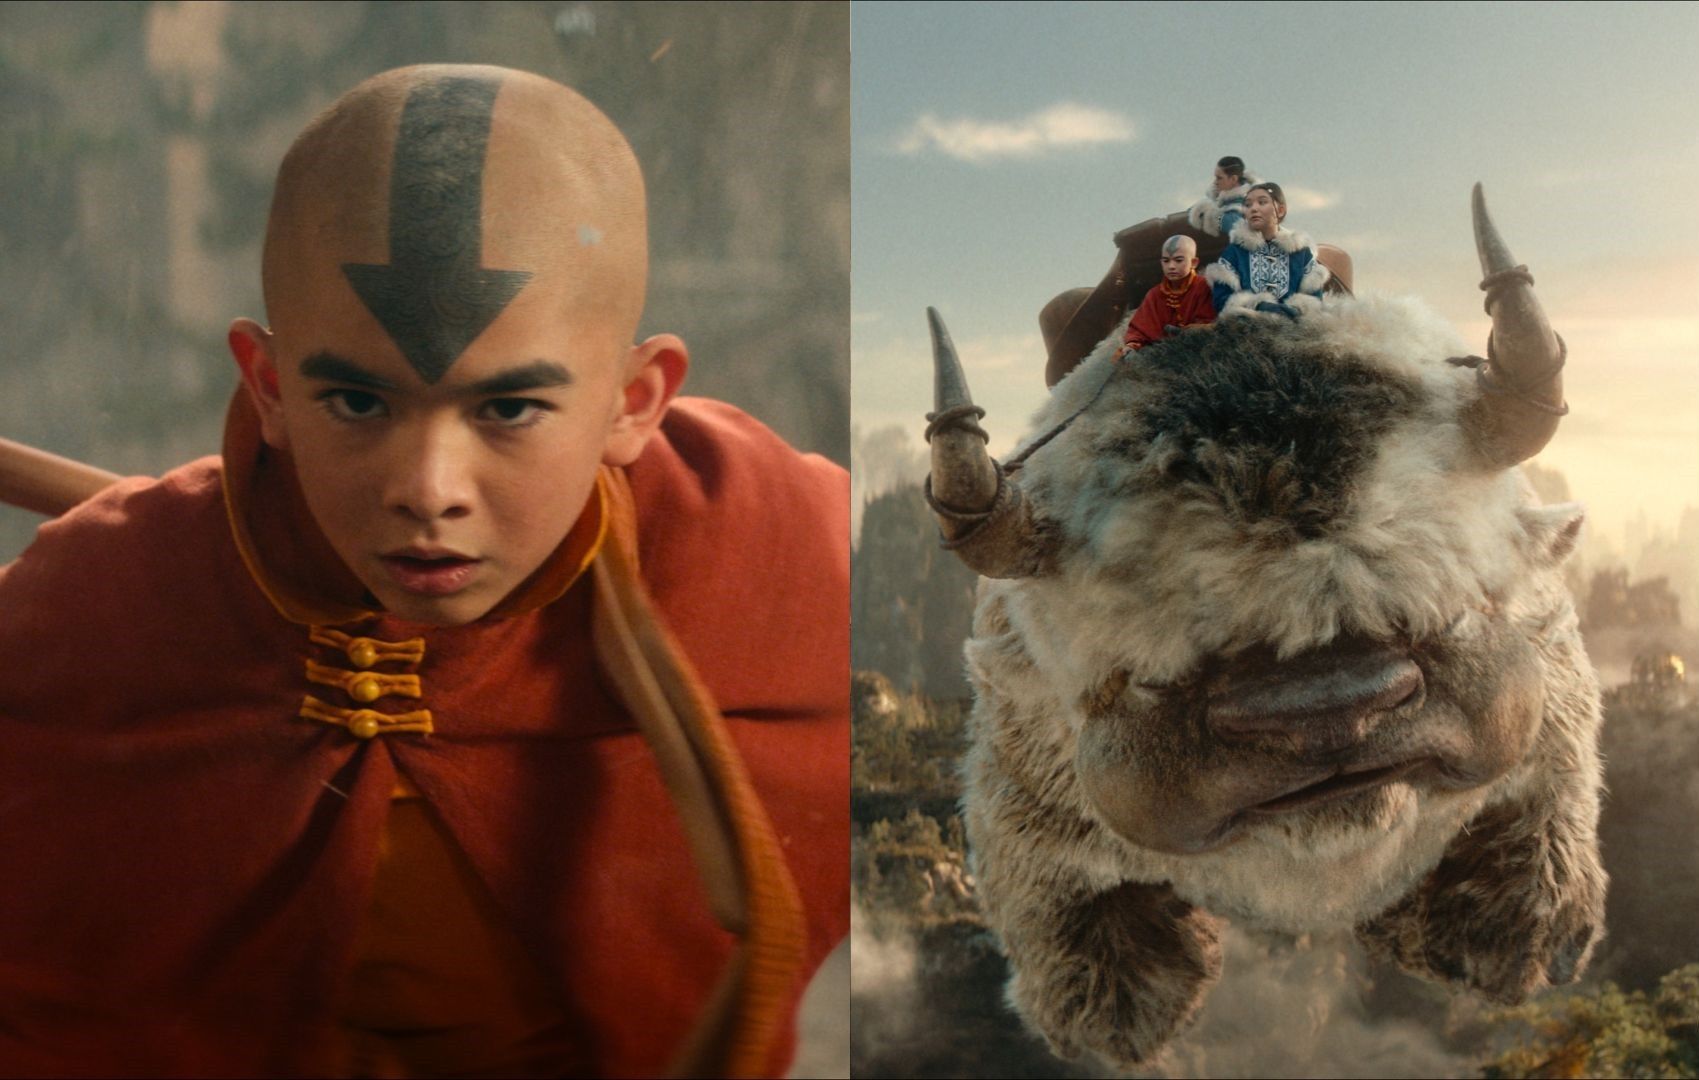 WATCH: Netflix releases official trailer for 'Avatar: The Last Airbender'